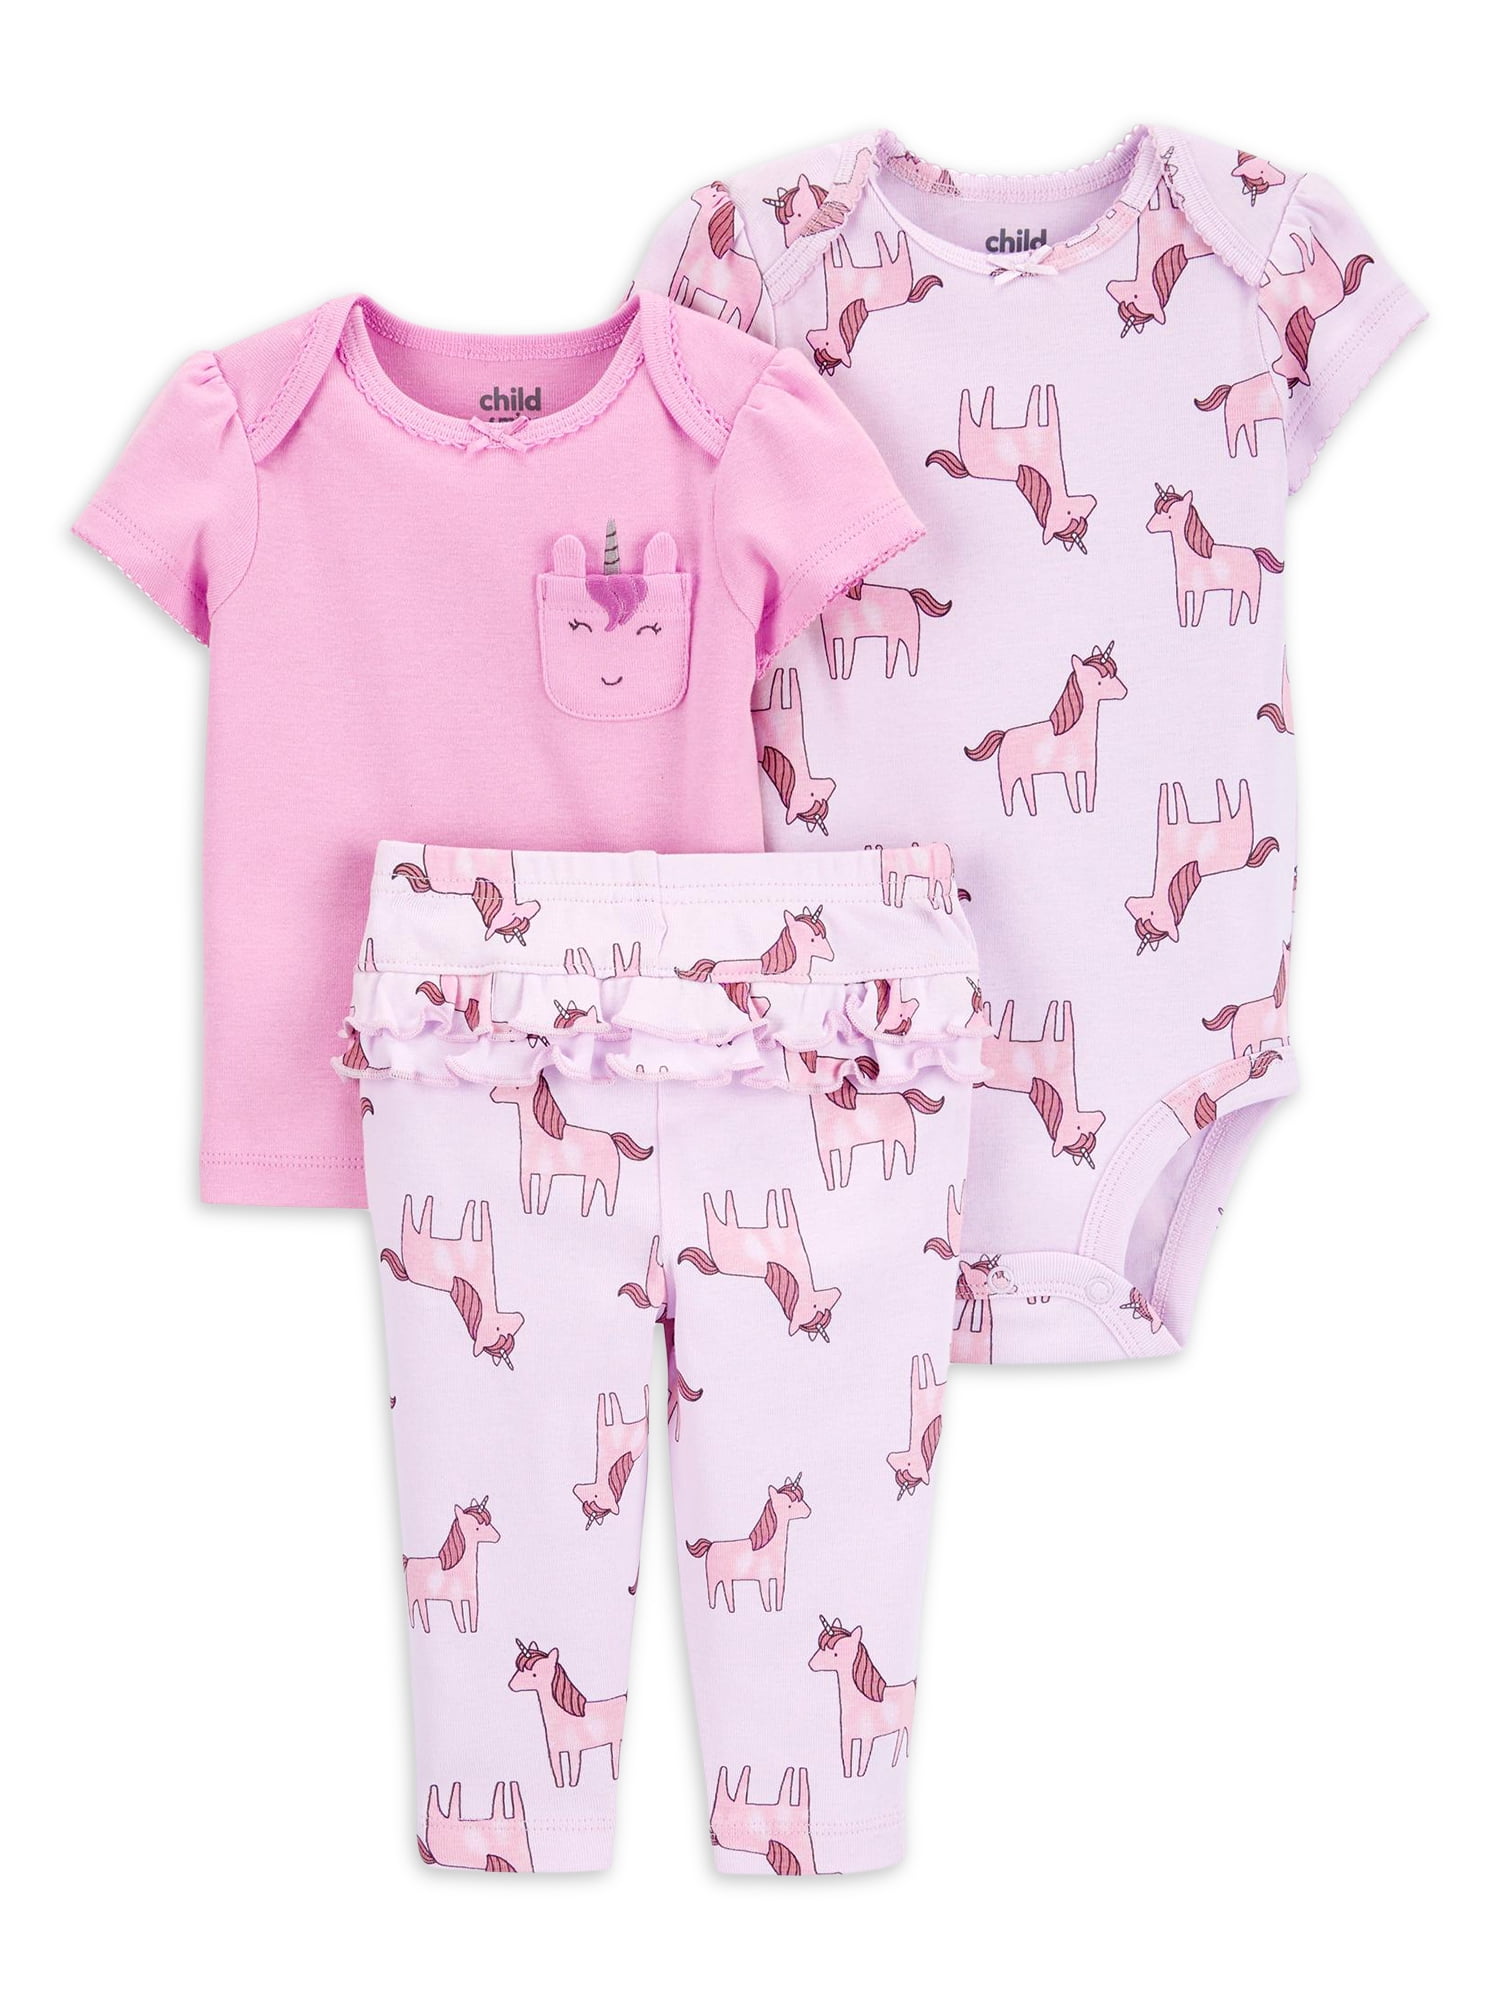 Carter's Child of Mine Baby Girl Outfit Set, 3-Piece, Sizes 0-24 Months